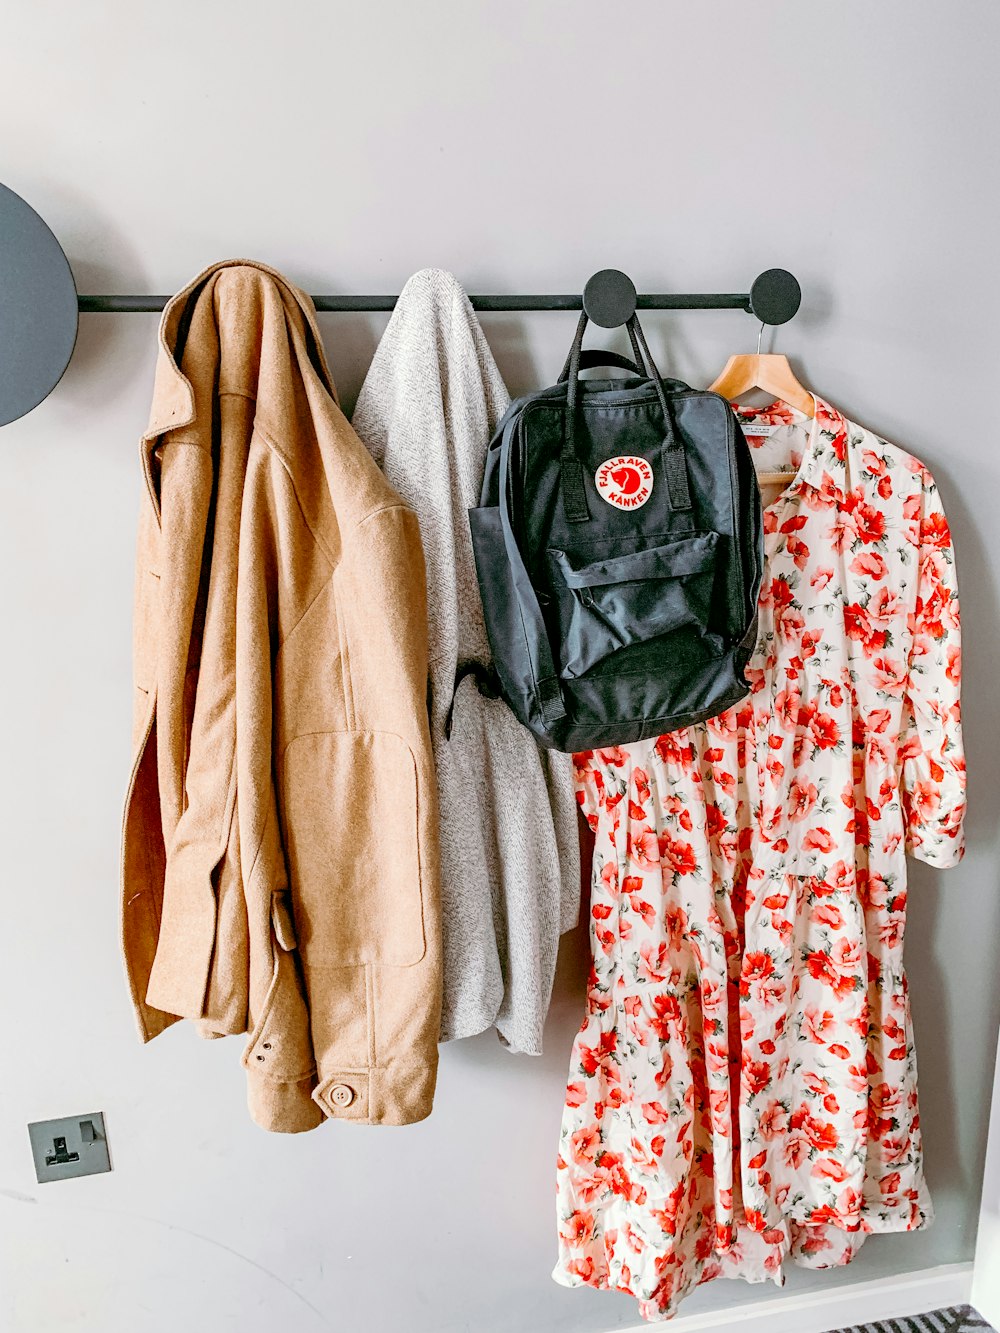 coat, sweater, backpack, and floral dress hanging on wall hanger